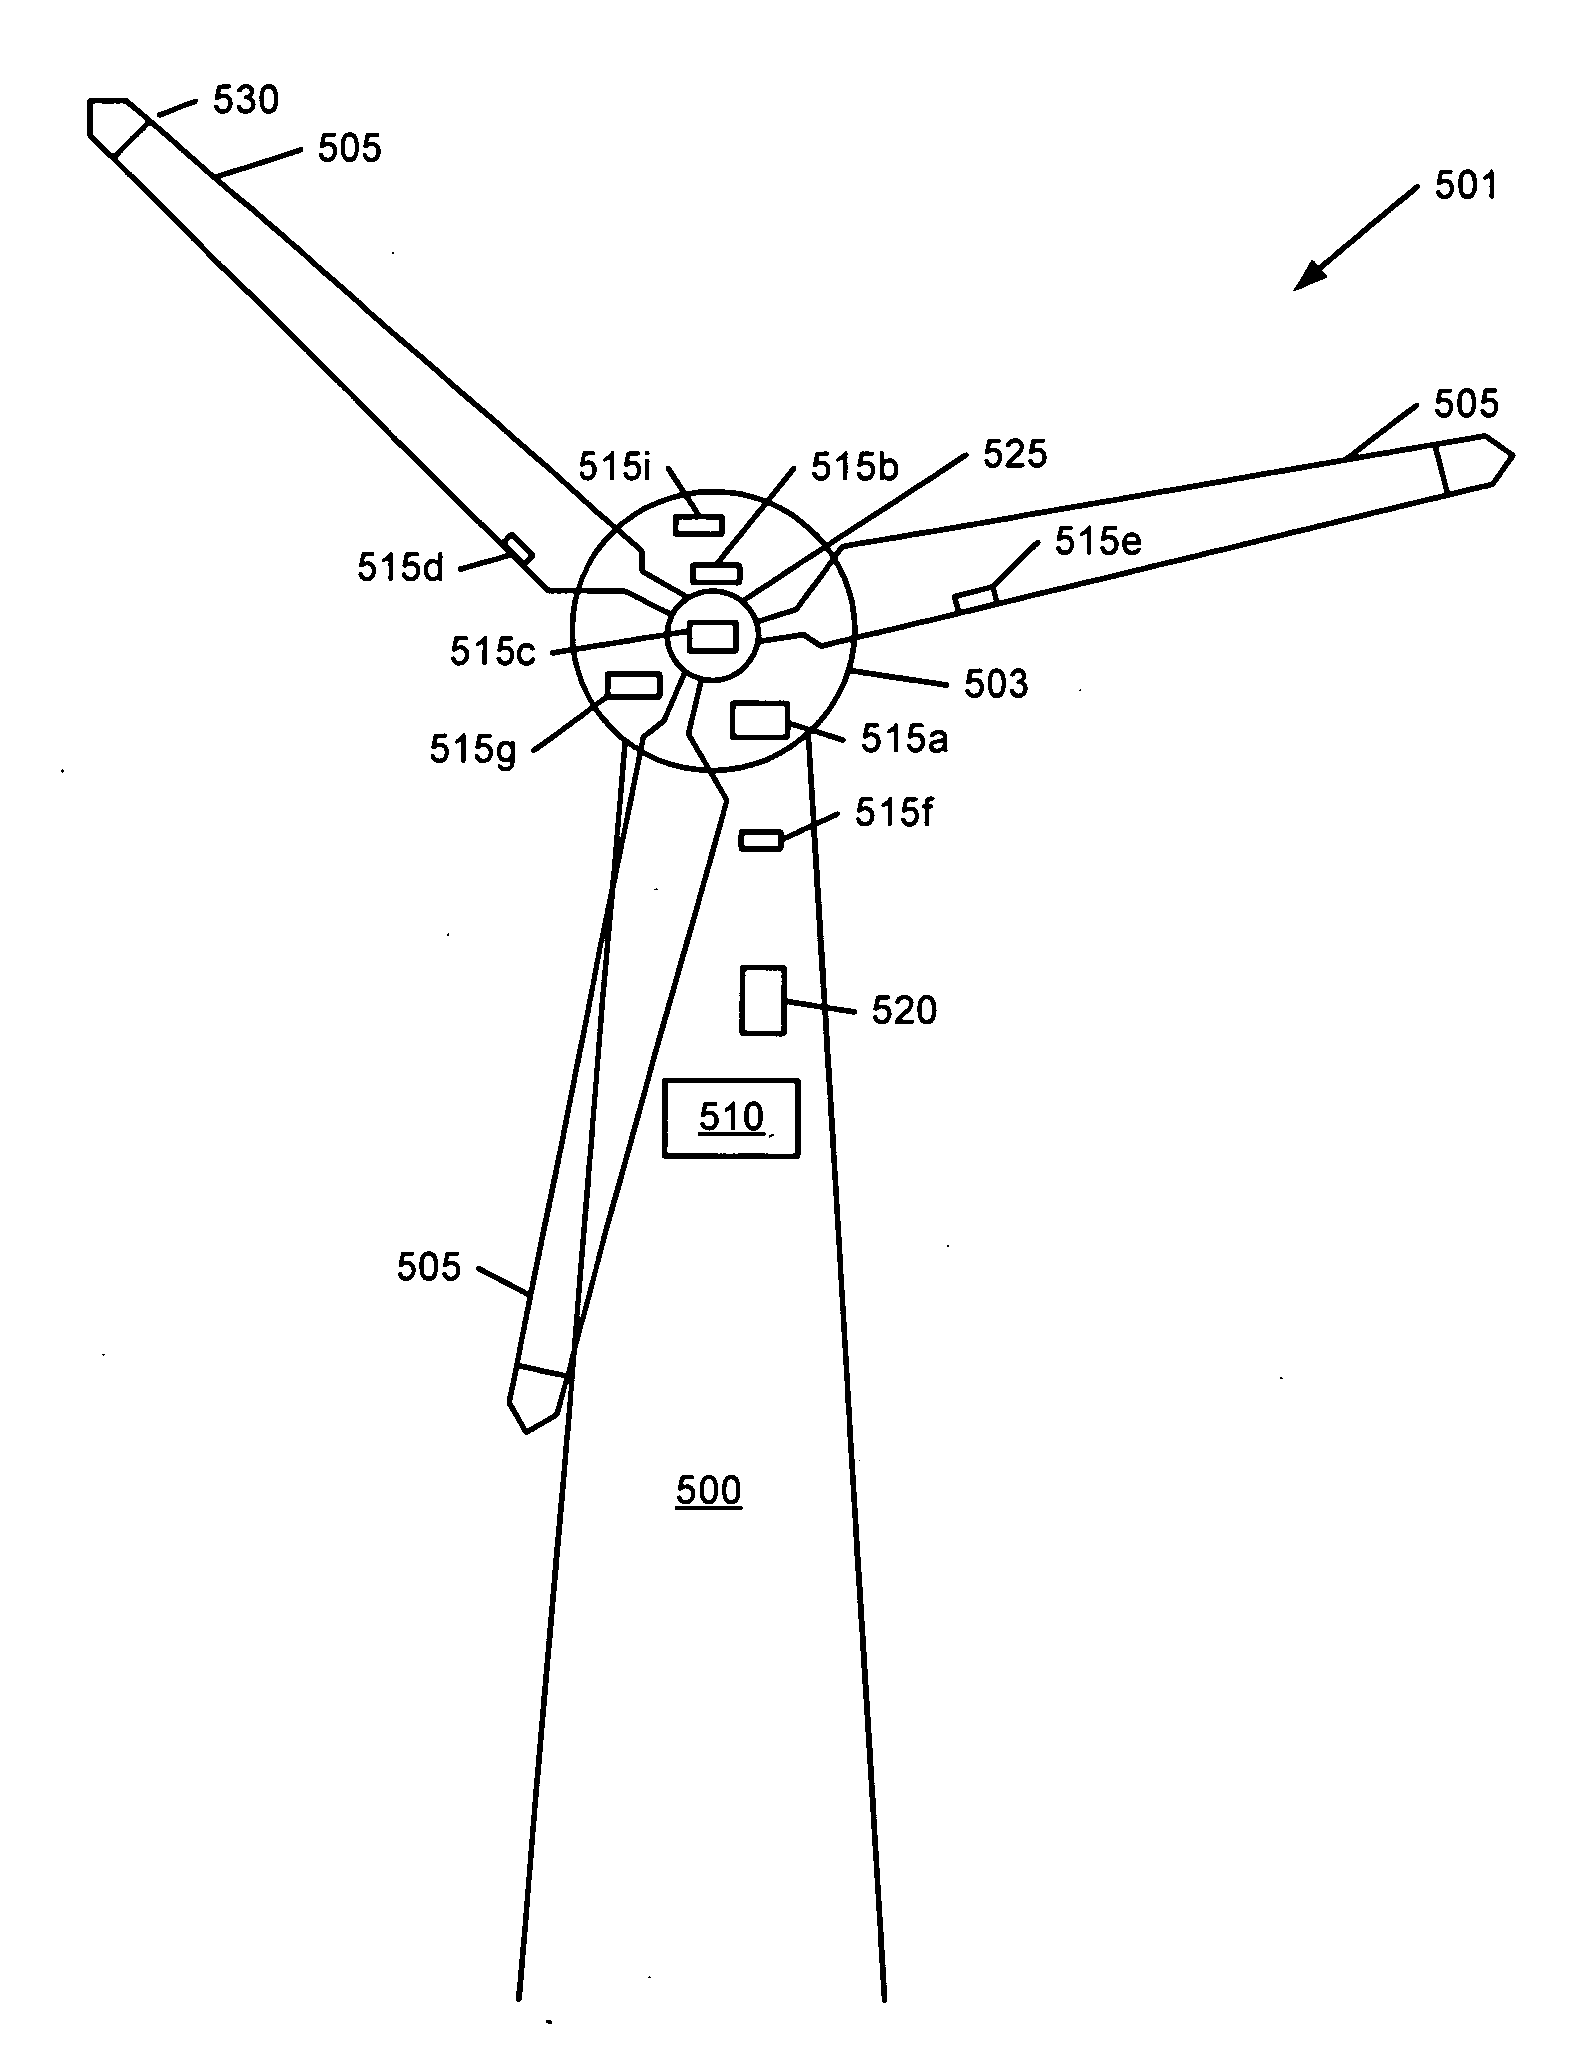 Control Modes for Extendable Rotor Blades